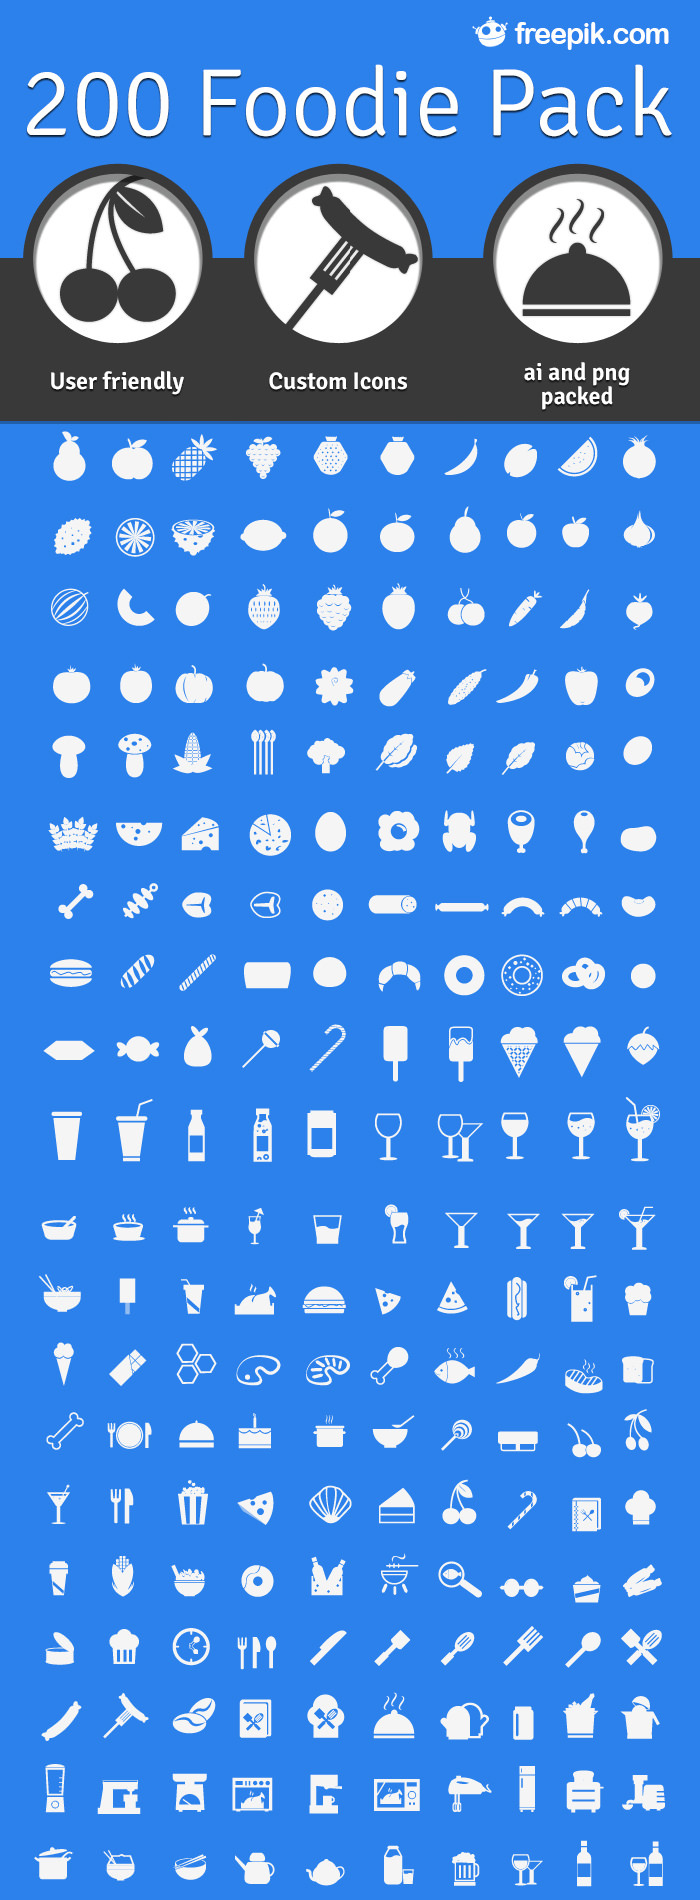 List of Free Food Icons for Restaurant-Themed UIs - Designmodo